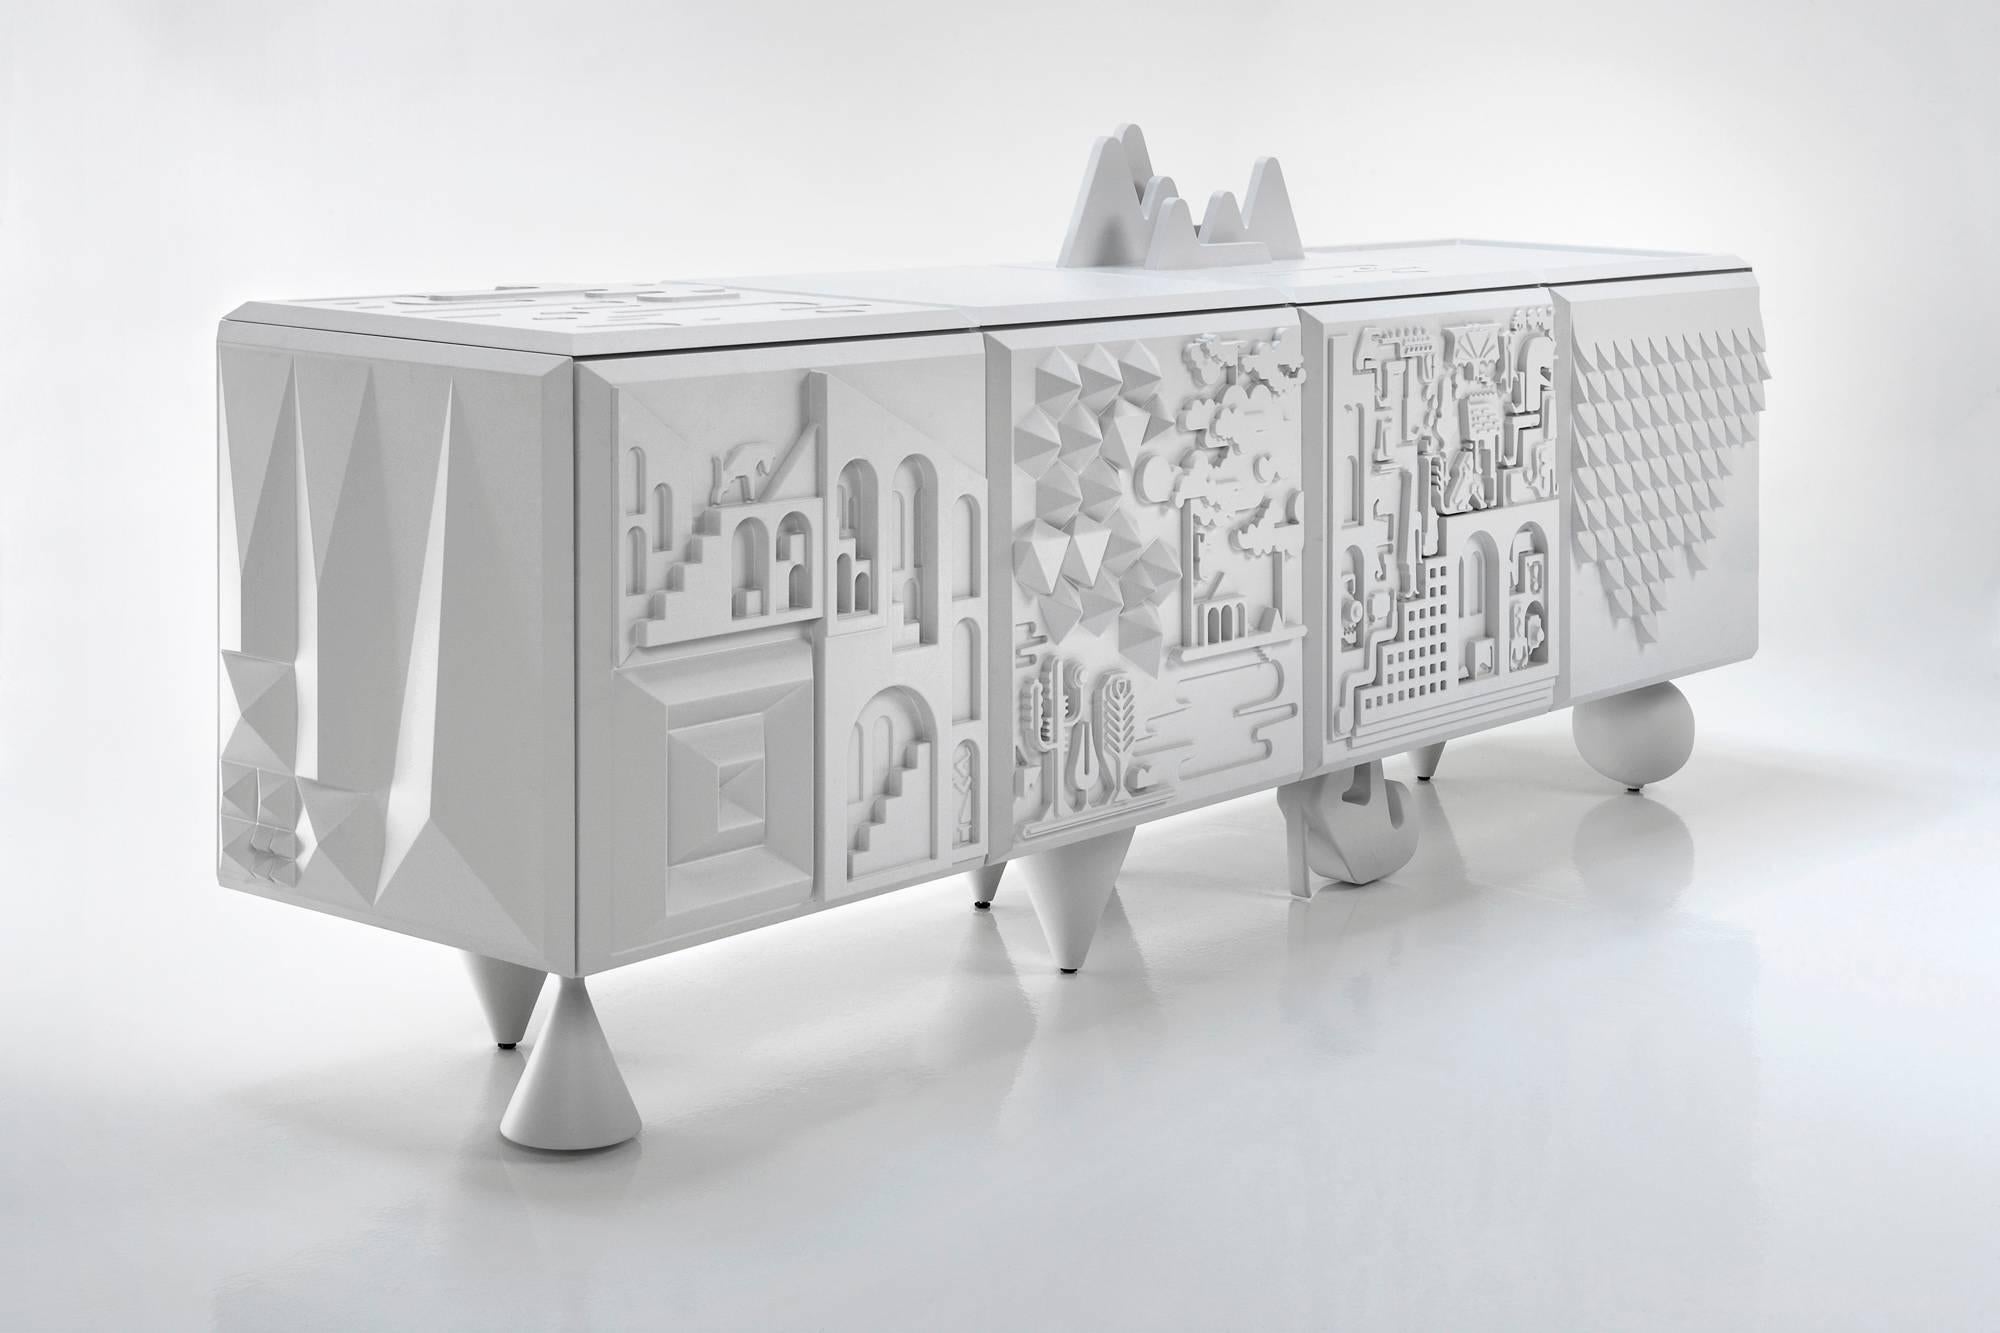 This Cabinet designed by Antoine and Manuel for this Collection edited by BD is a surprising mixture of applied arts, hieroglyphic language, contemporary graphics, fantasy and optimism. Produced with yesteryear quality, using here and now technology